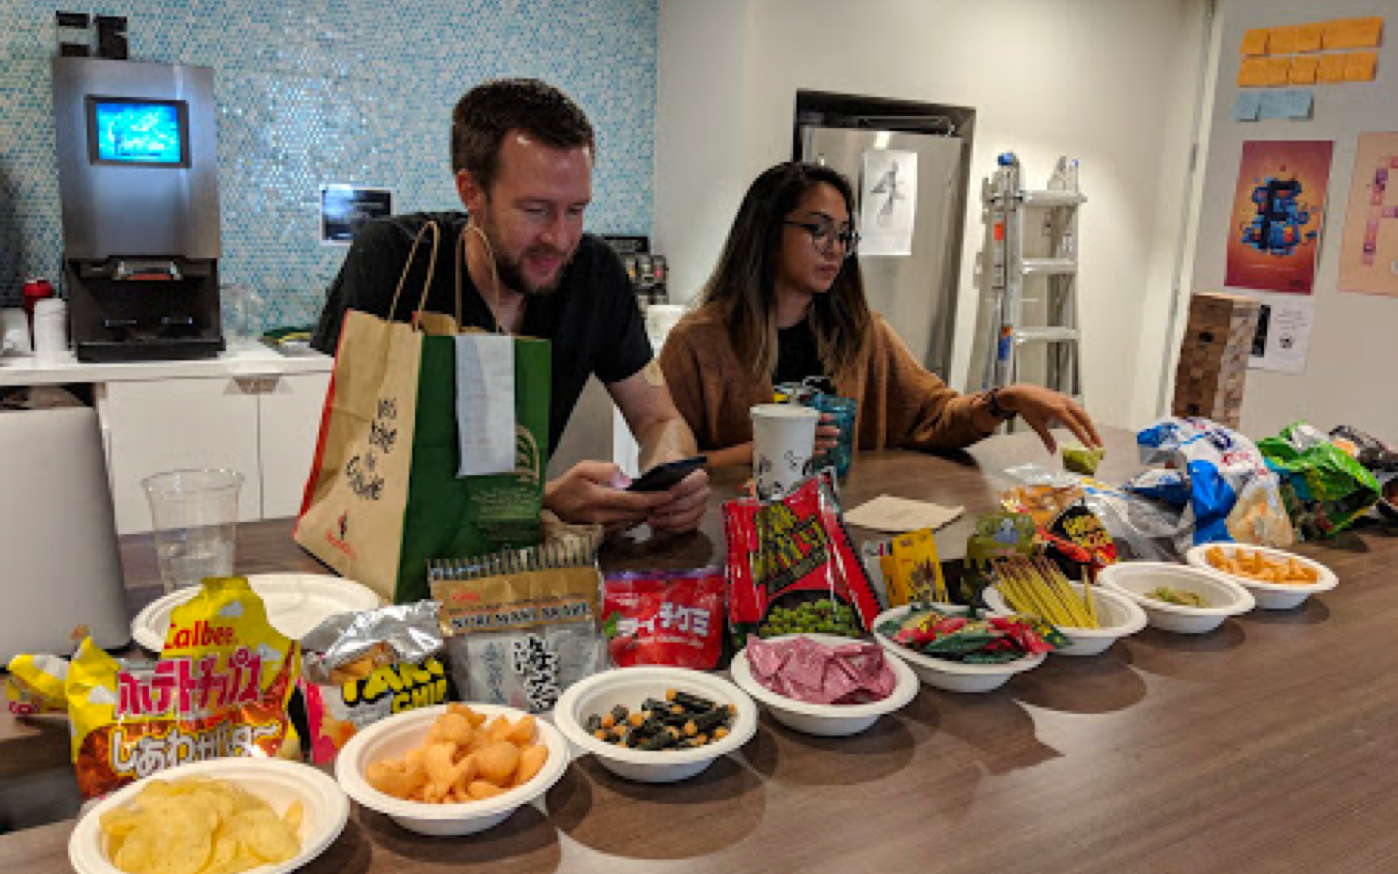 A white man and a Filipino woman setting up behind a row of Korean snacks.